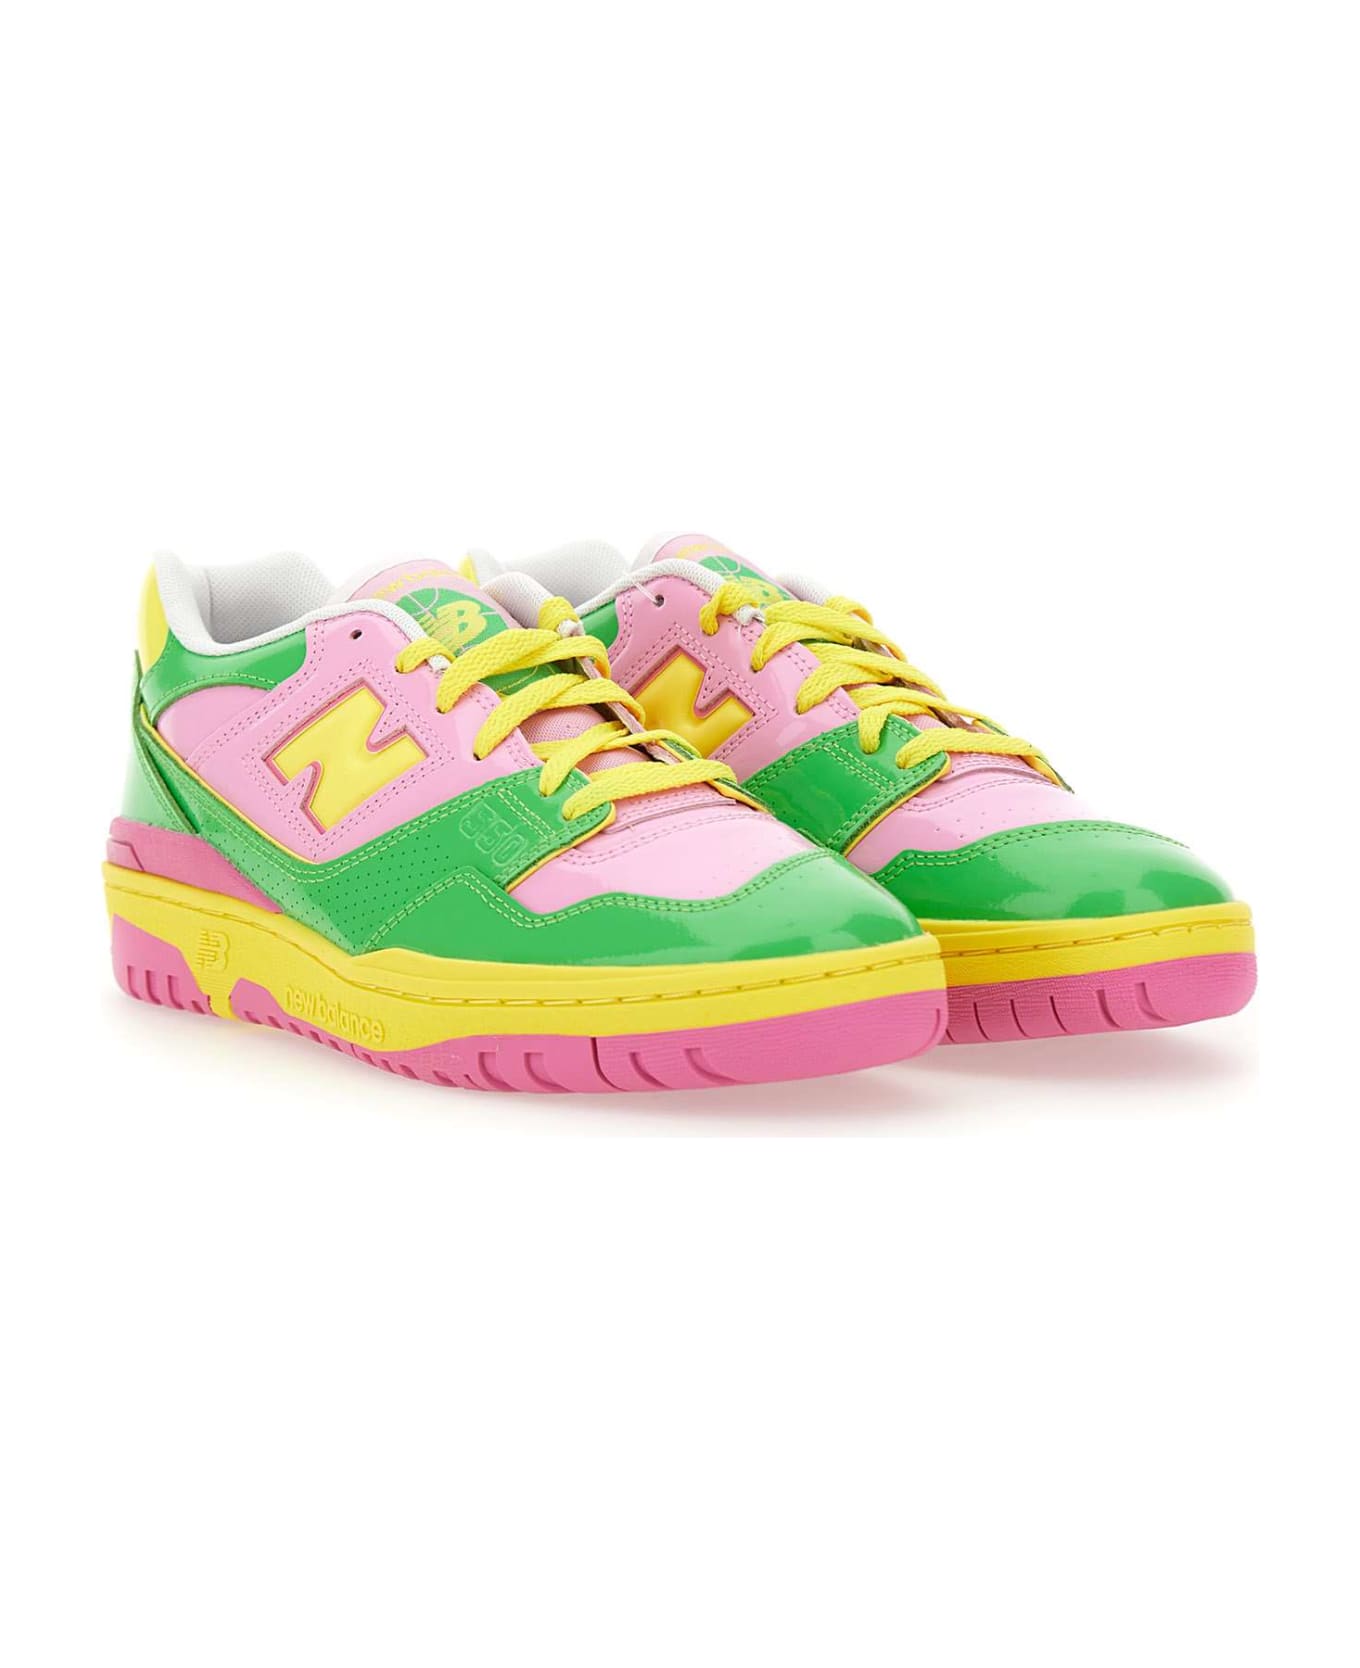 New Balance "bb550" Sneakers - Pink-green-lime